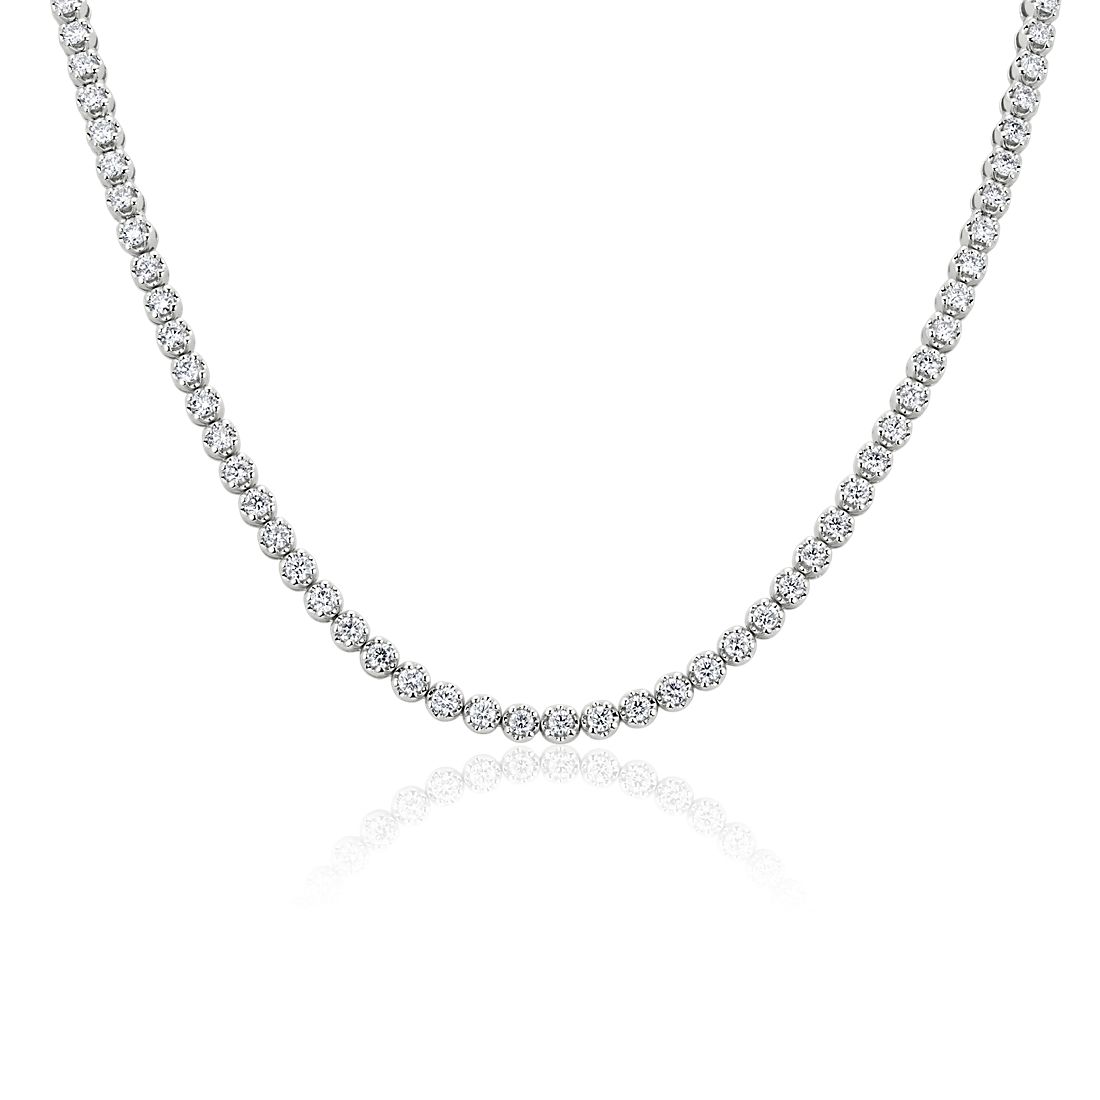 Straight Diamond Eternity Necklace in 14k White Gold (7 ct. tw.)